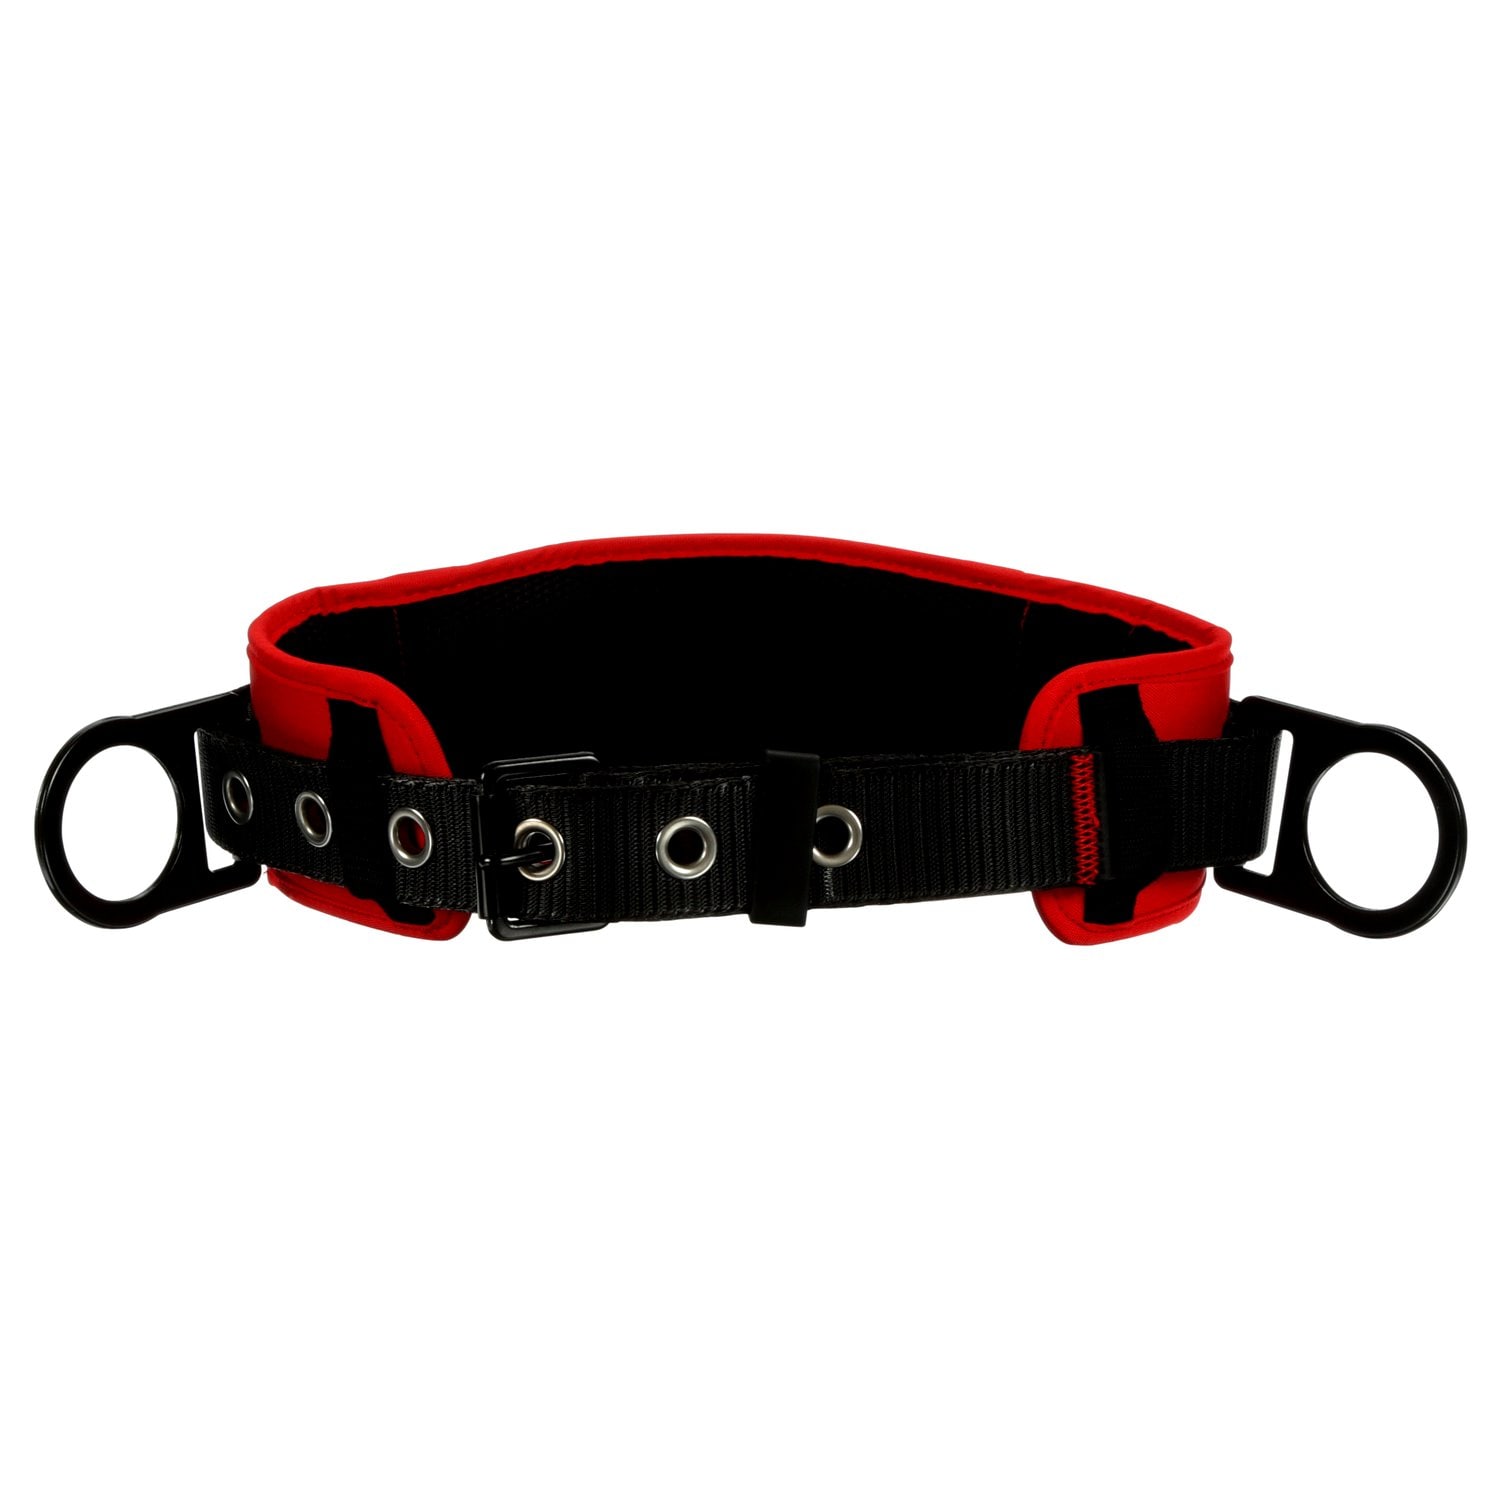 7012815162 - 3M Protecta Tongue Buckle Positioning Belt with Hip Pad 1091015, Red, X-Large